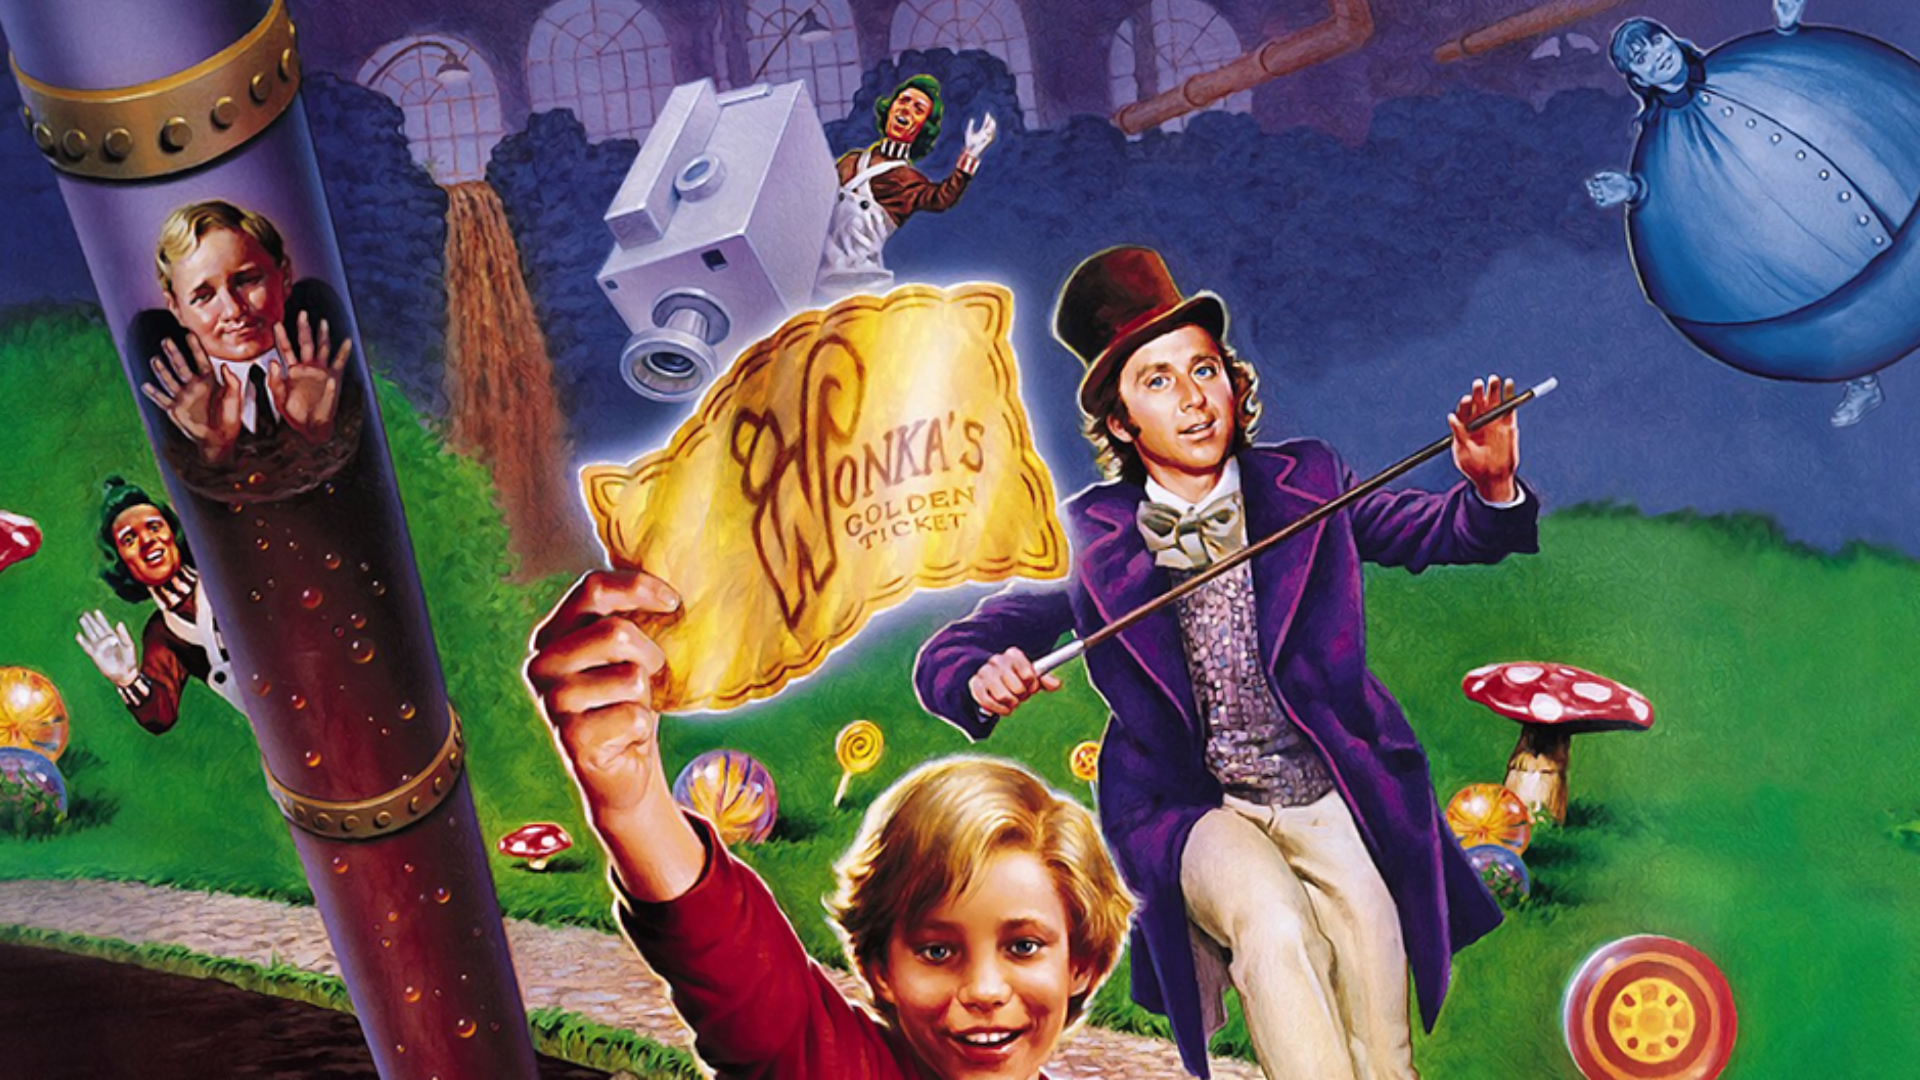 Willy Wonka And The Chocolate Factory Original Movie - HD Wallpaper 